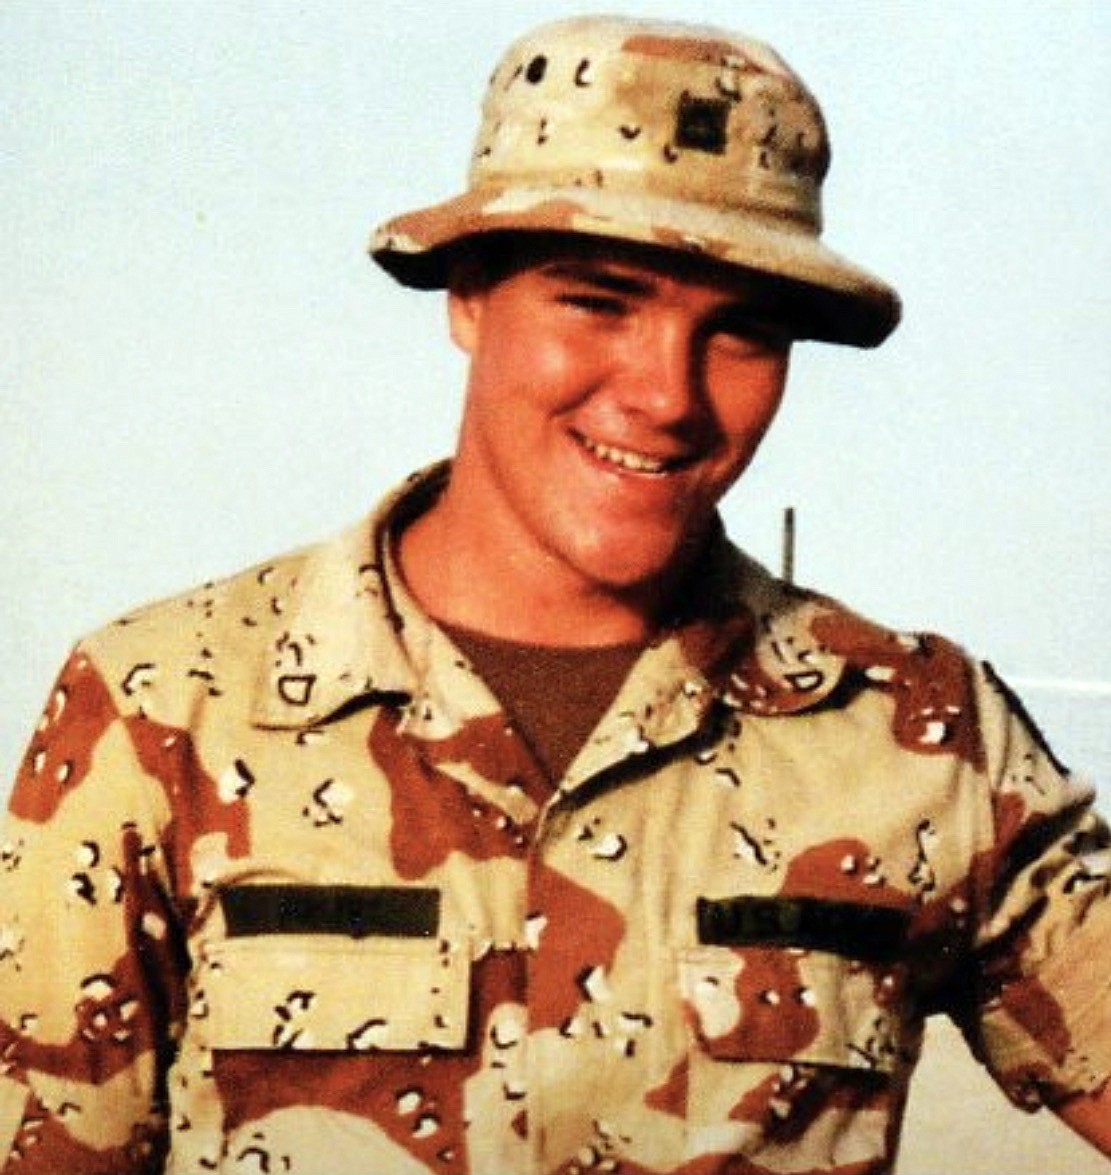 Courtesy photo
A photo of Foster in 1990 while he was in Desert Storm.